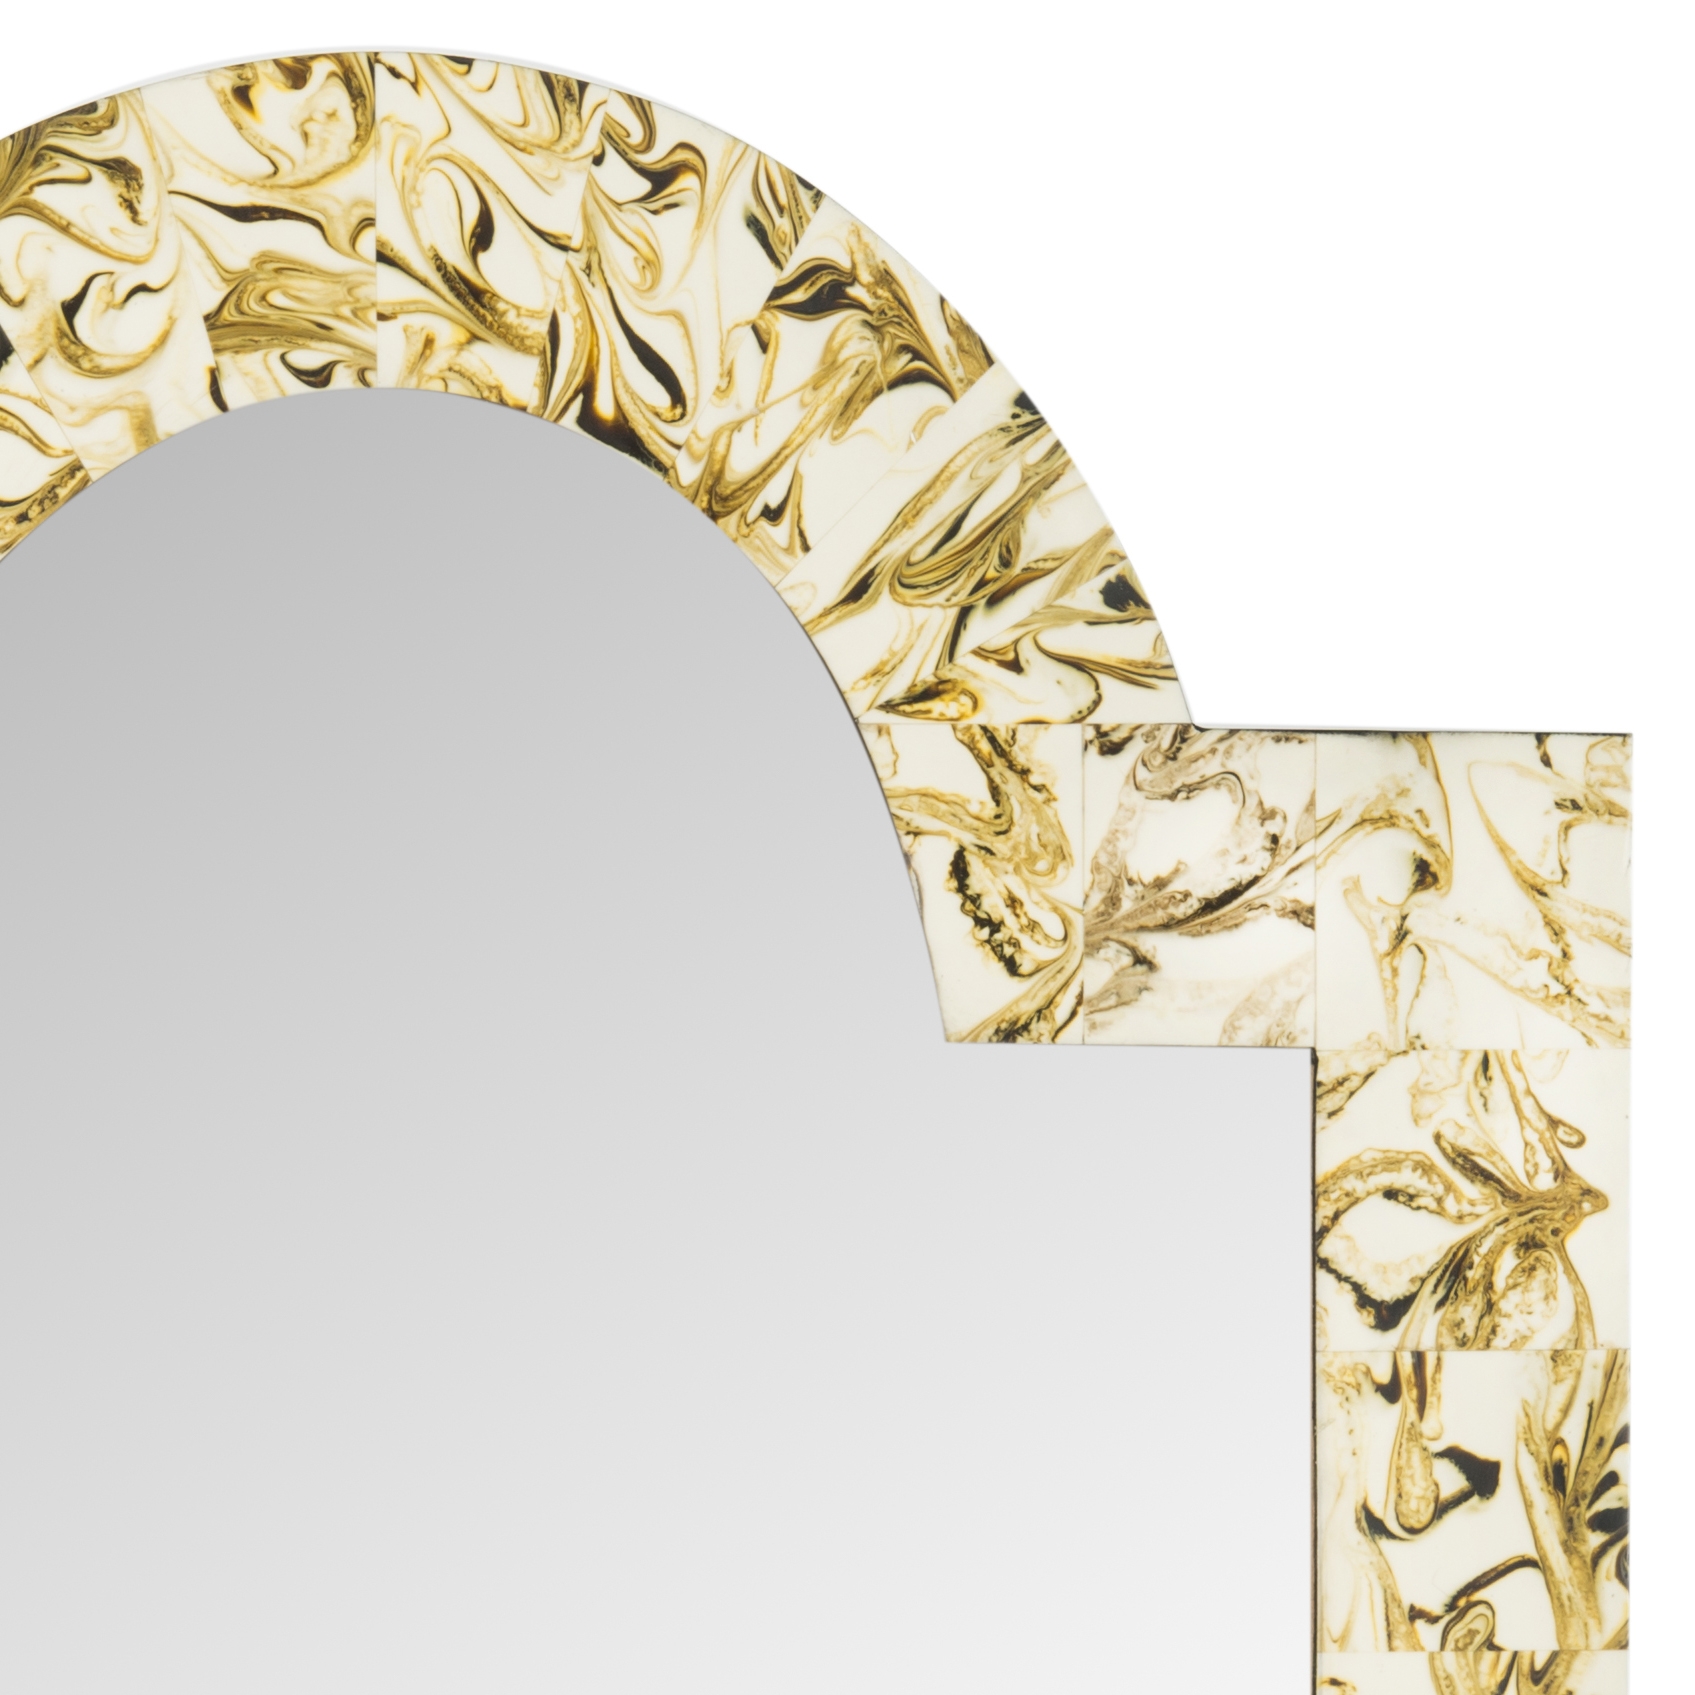 Antibes Arched Mirror - Multi - Arlo Home - Image 1